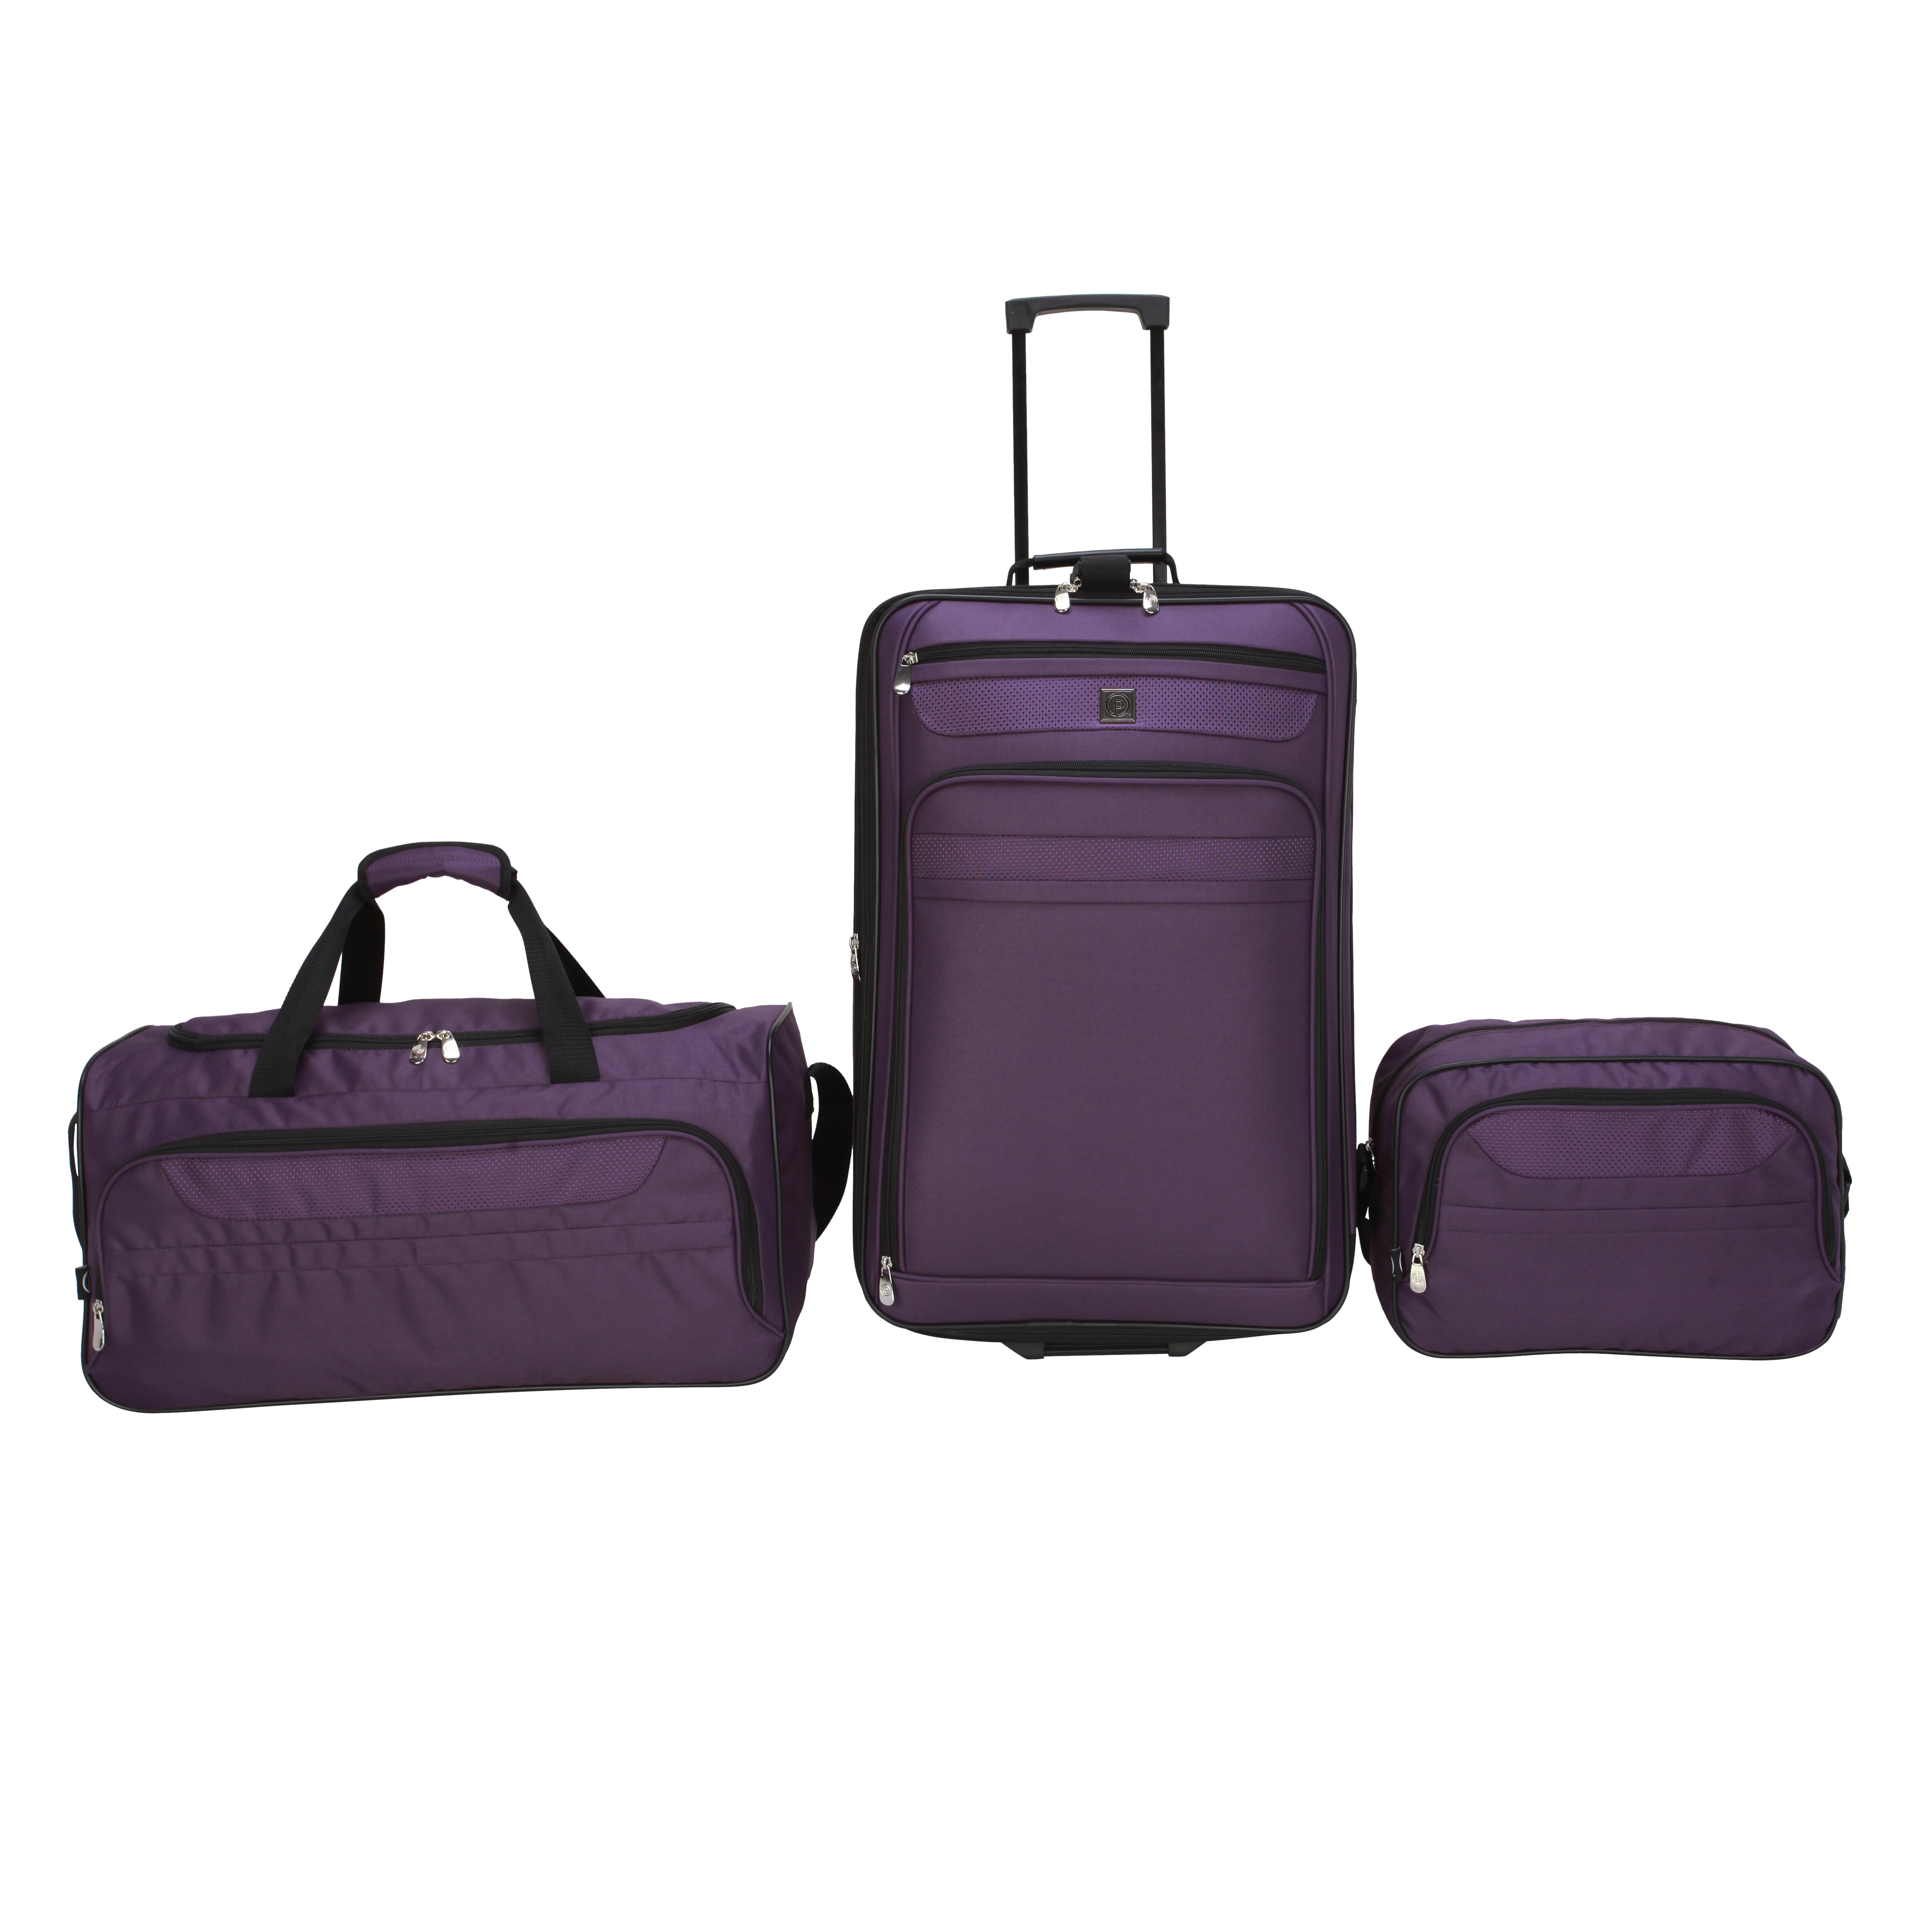 3 Piece Luggage Set - clothing & accessories - by owner - apparel